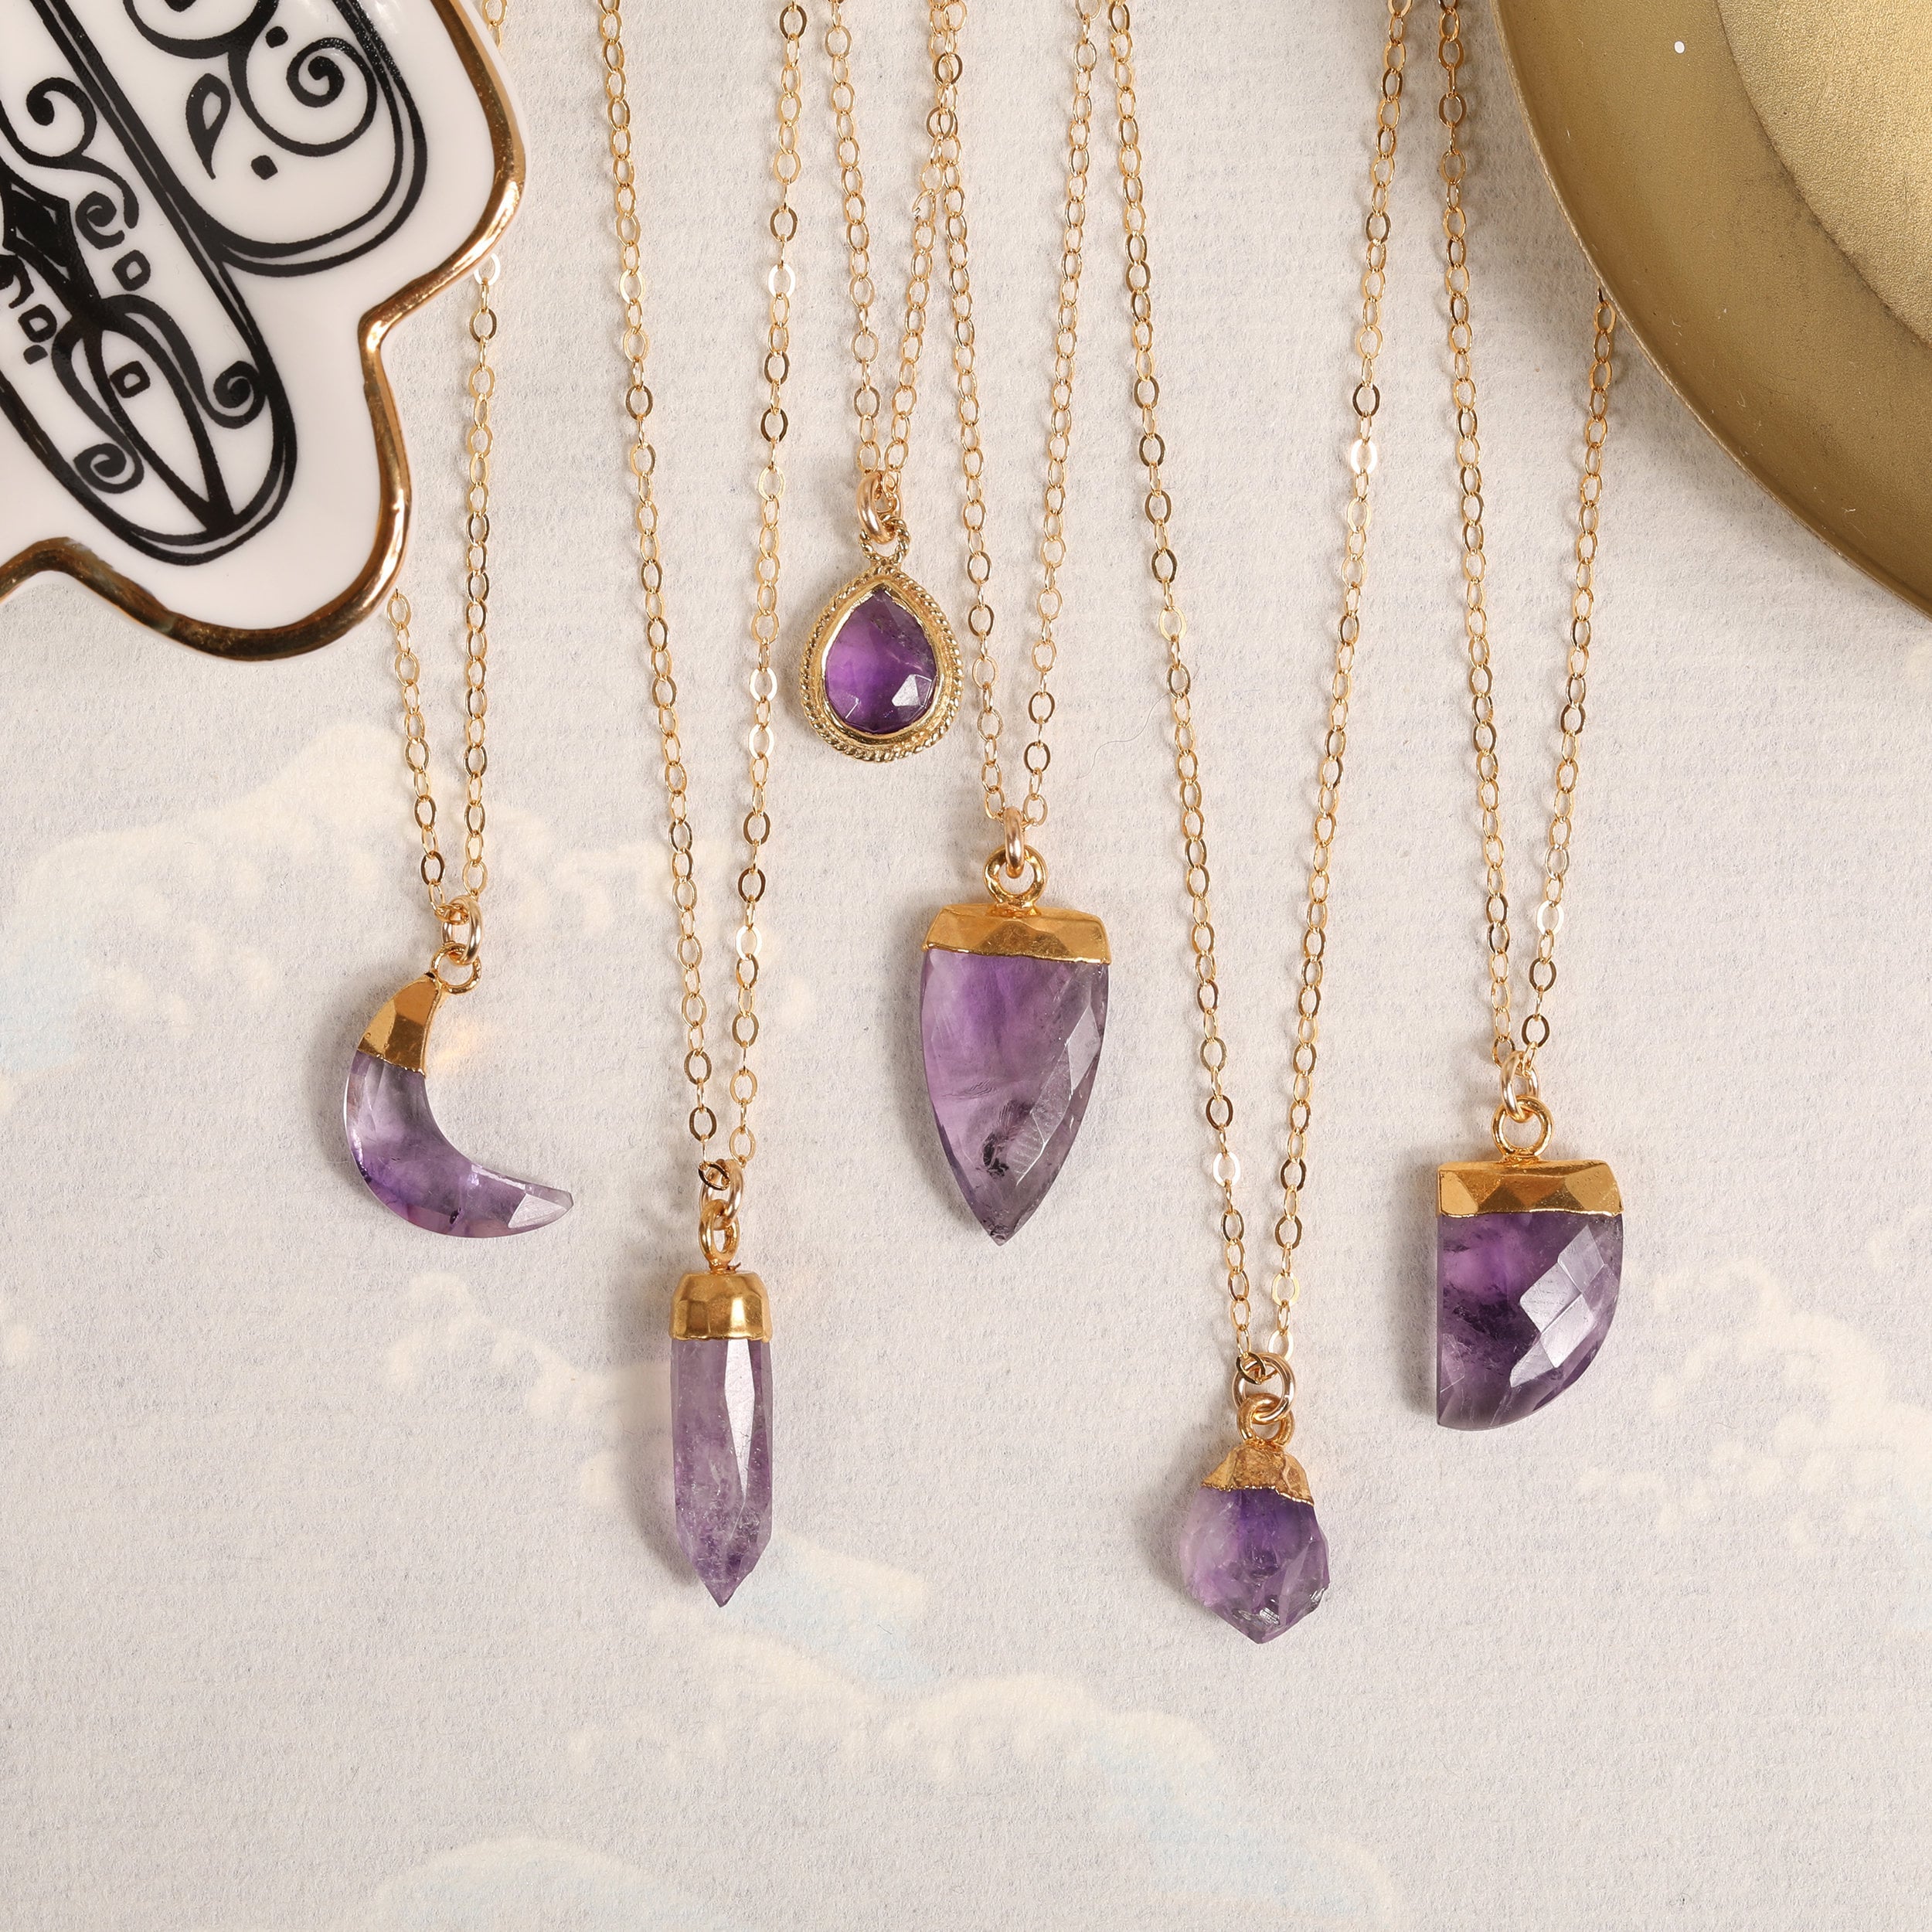 Amethyst necklace collection Necklaces Soul & Little Rose   